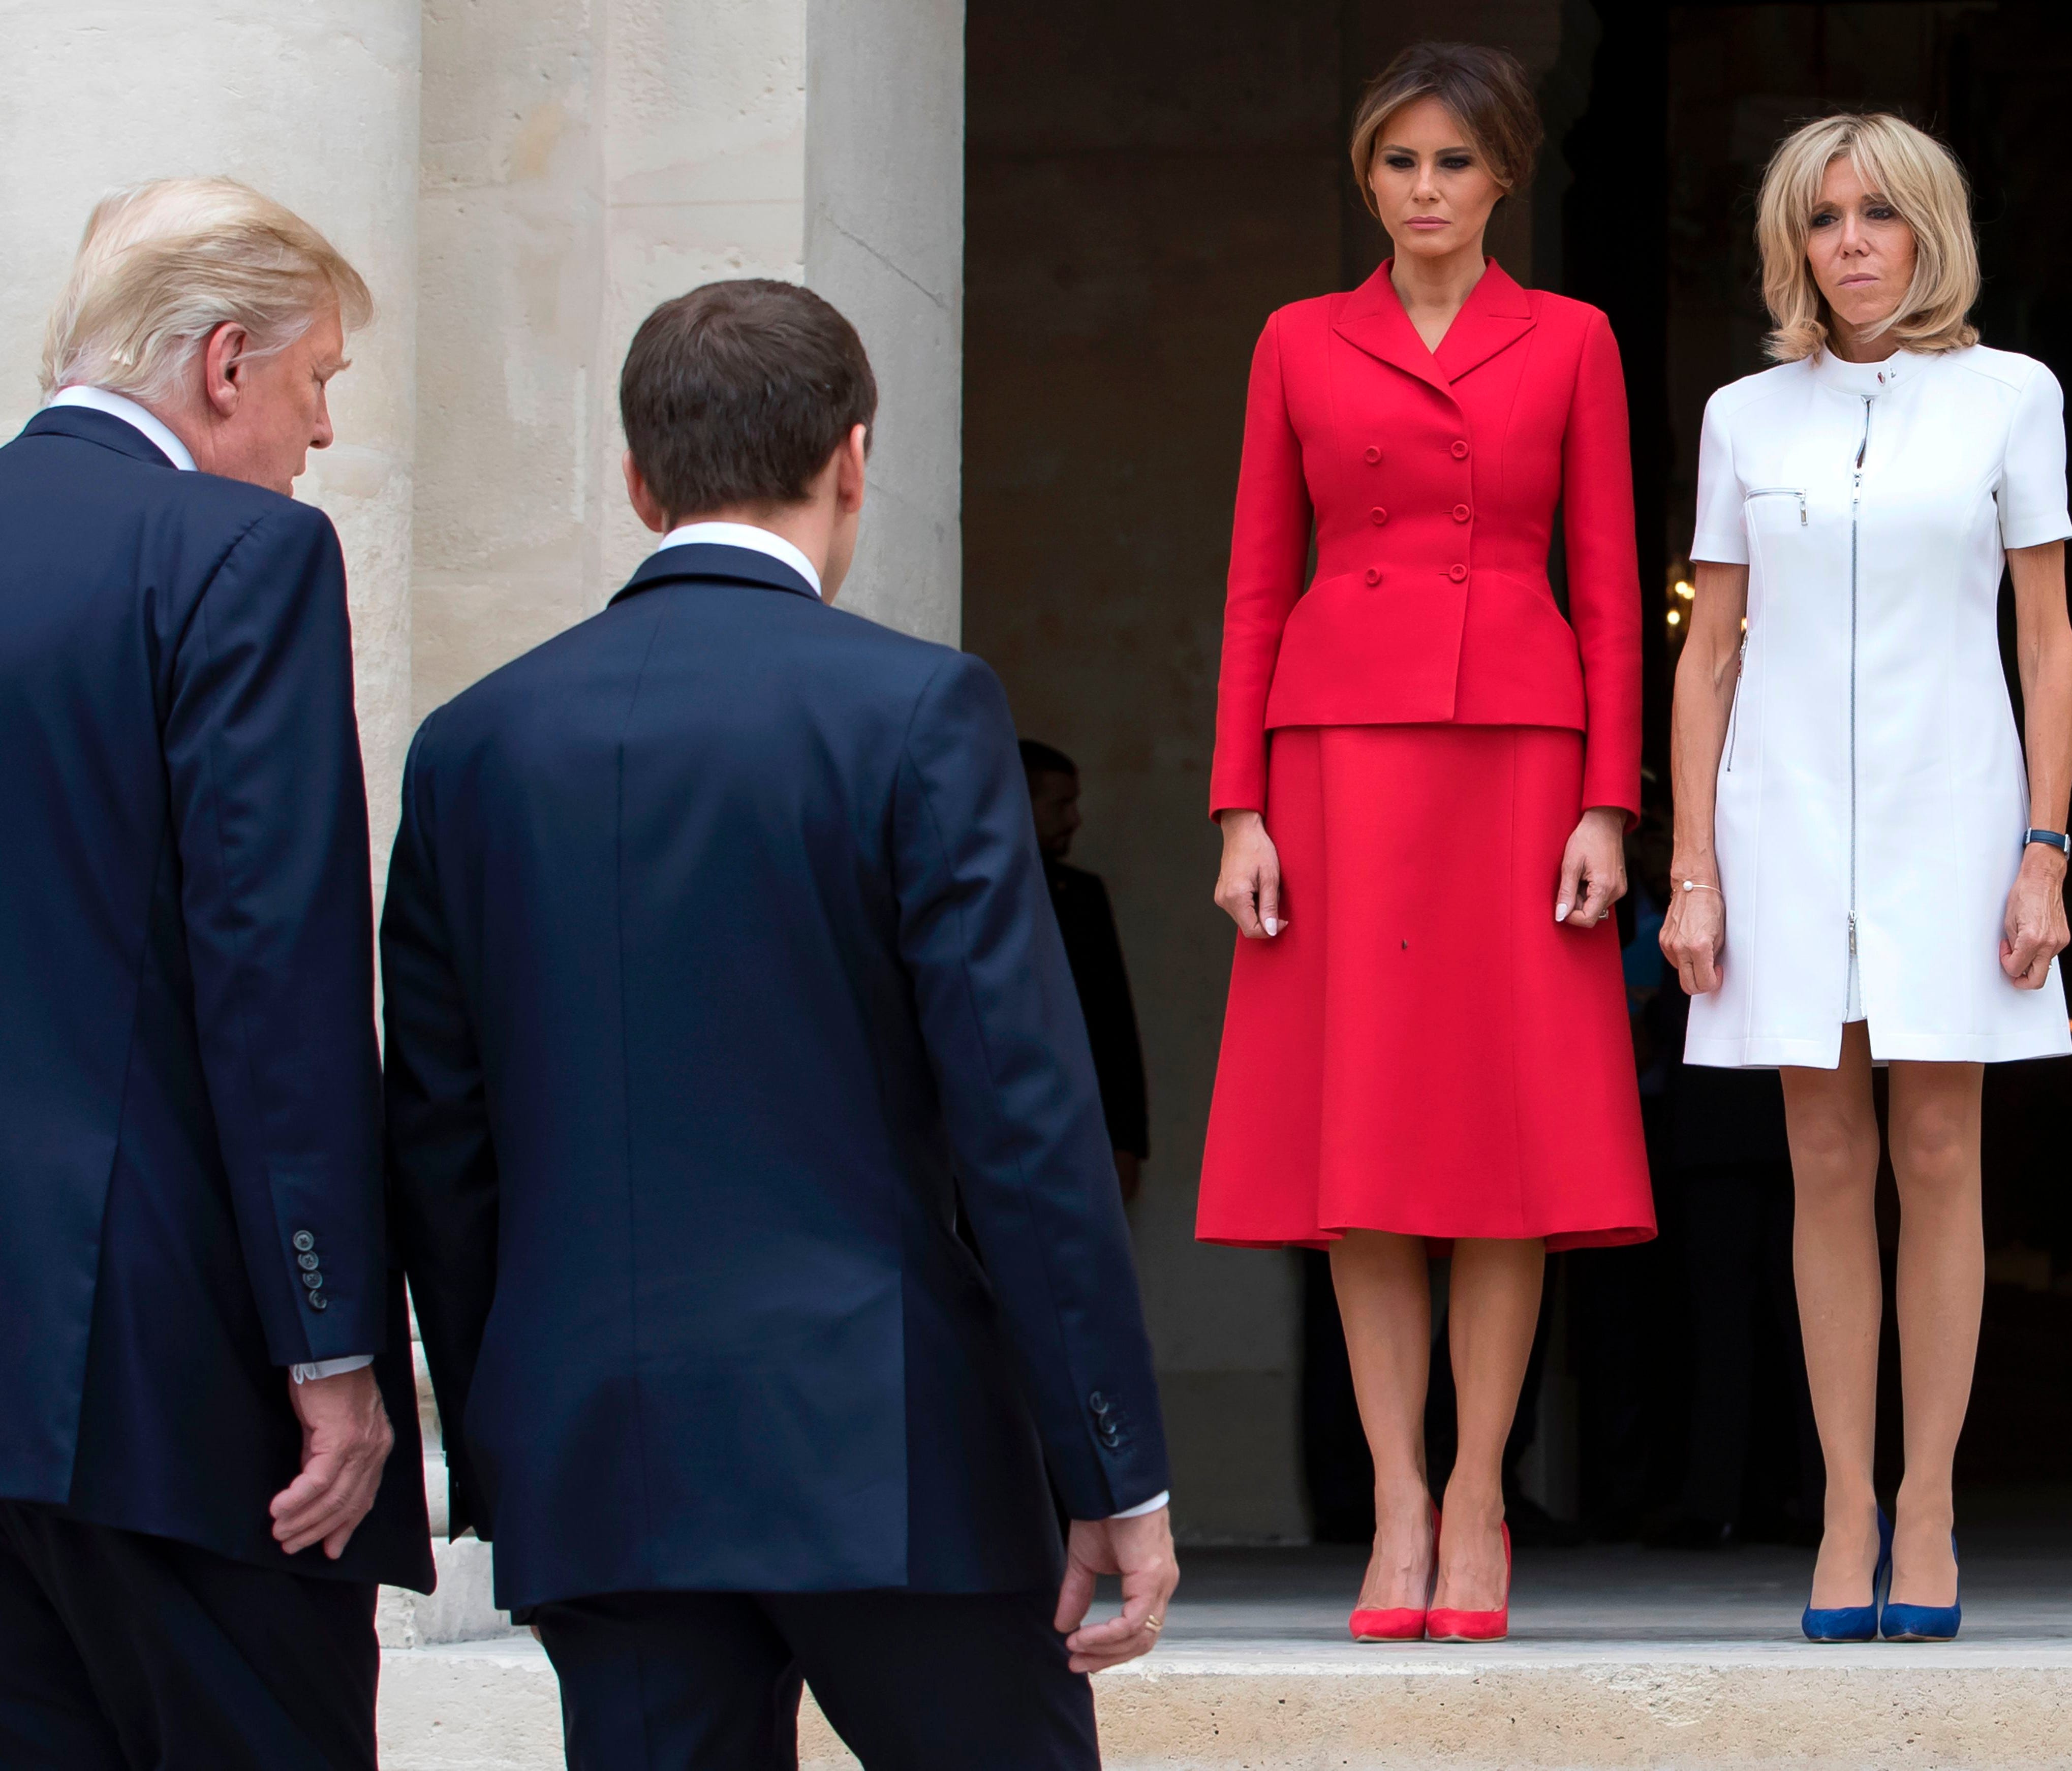 President Donald Trump, left, and French President Emmanuel Macron, right, walk toward first ladies Melania Trump and Brigitte Macron, as they arrive at the Army Museum during a welcome ceremony at Les Invalides in Paris, on July 13, 2017, as part of